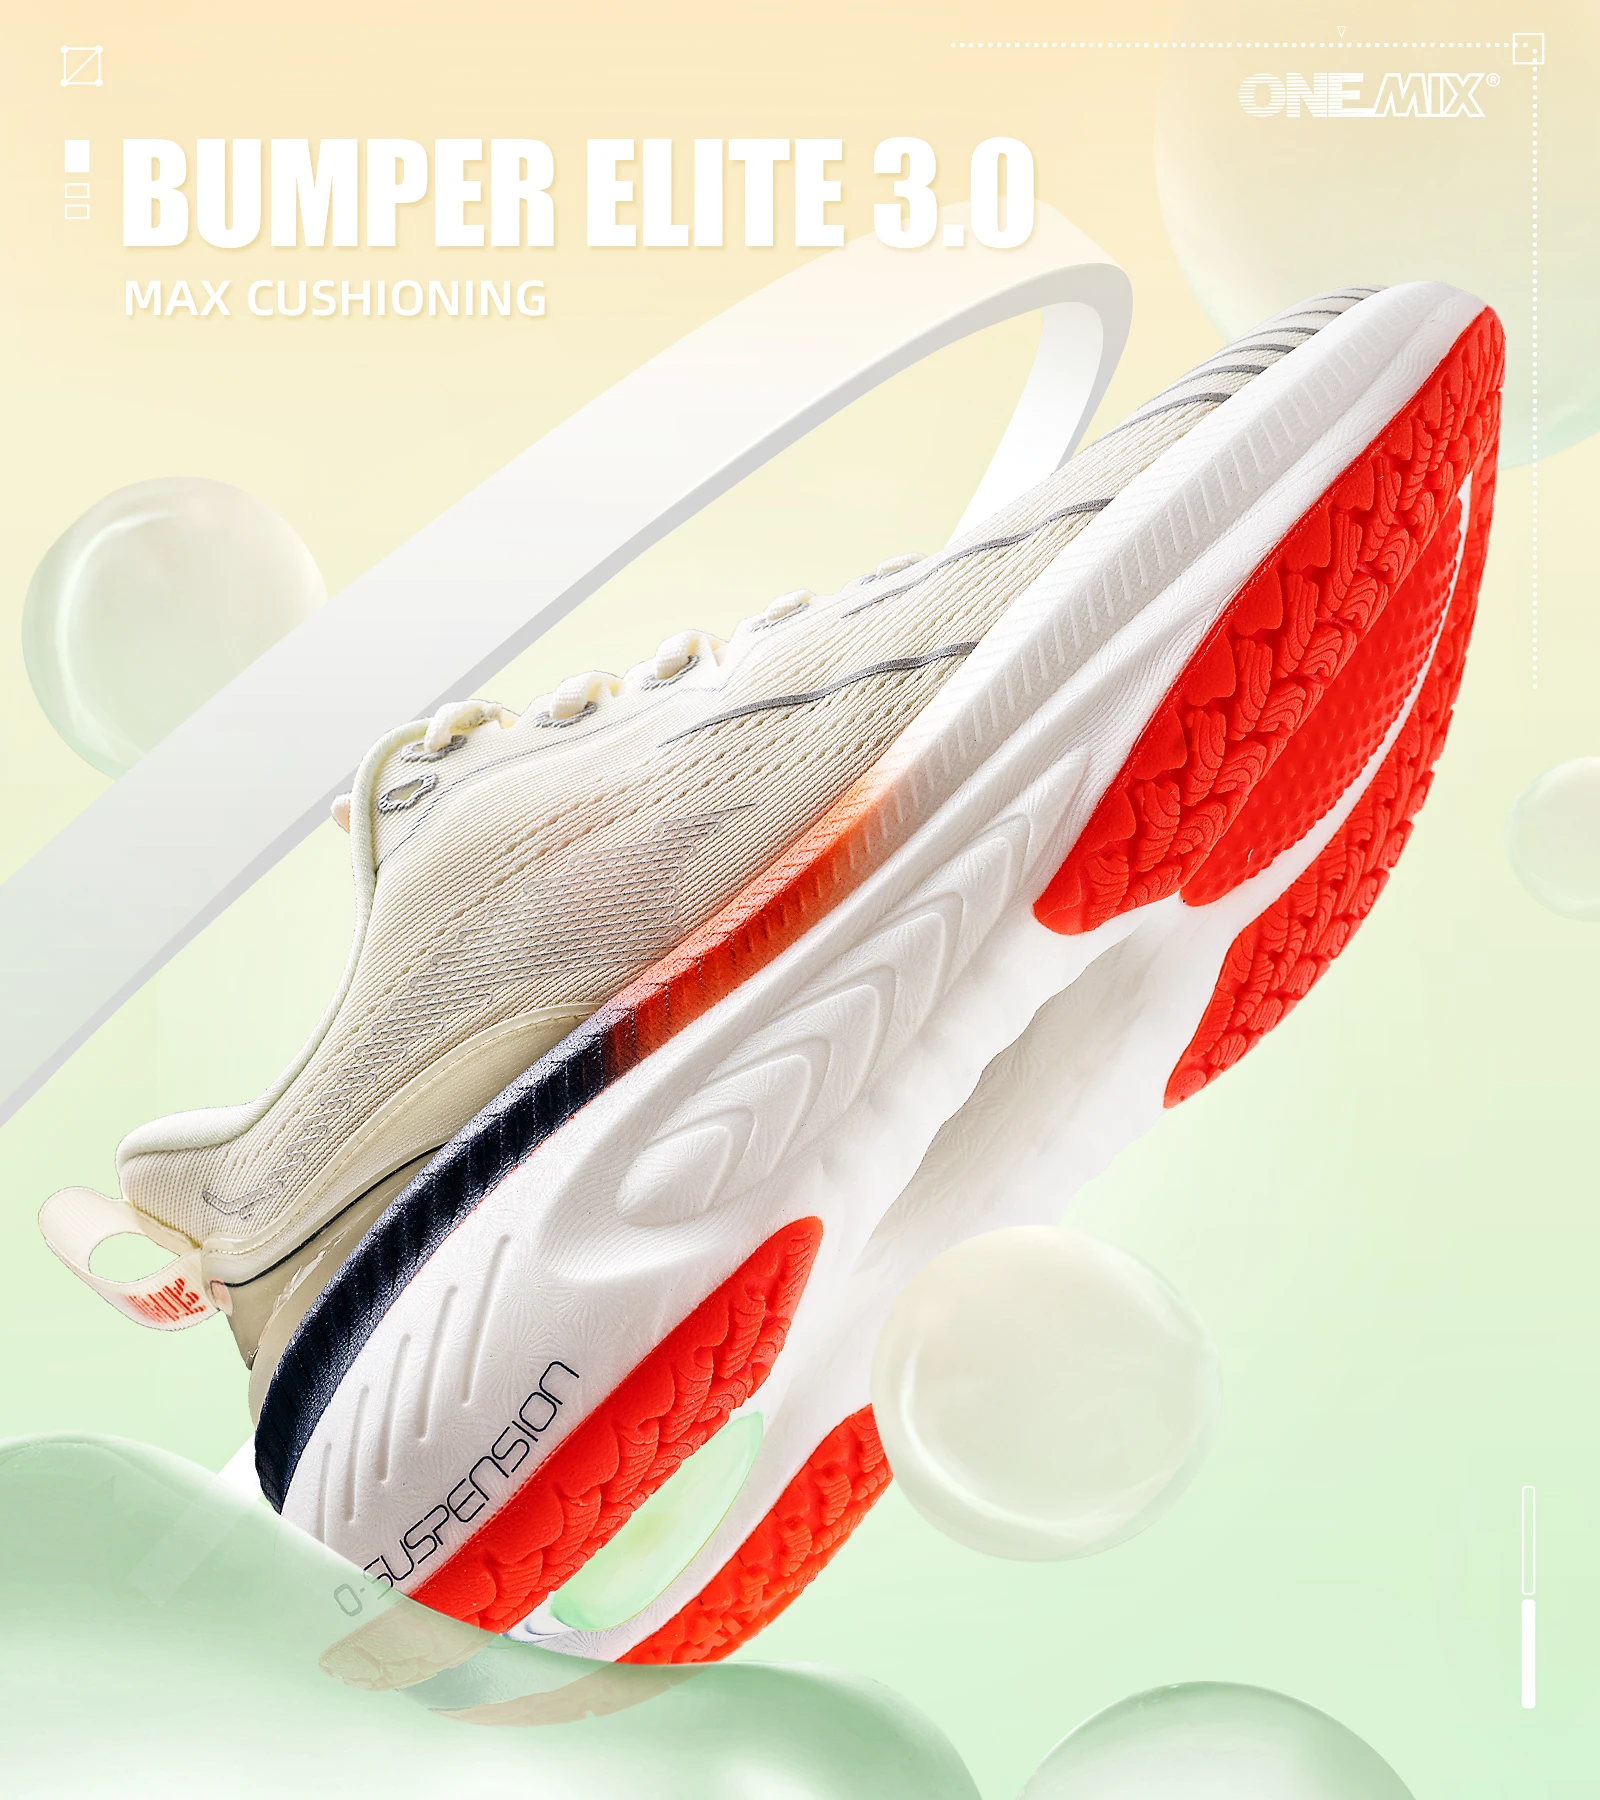 

ONEMIX Top Cushioning Running Shoes Suitable for Heavy Runners Lace Up Sport Shoes Non-slip Outdoor Athletic Sneakers for Men